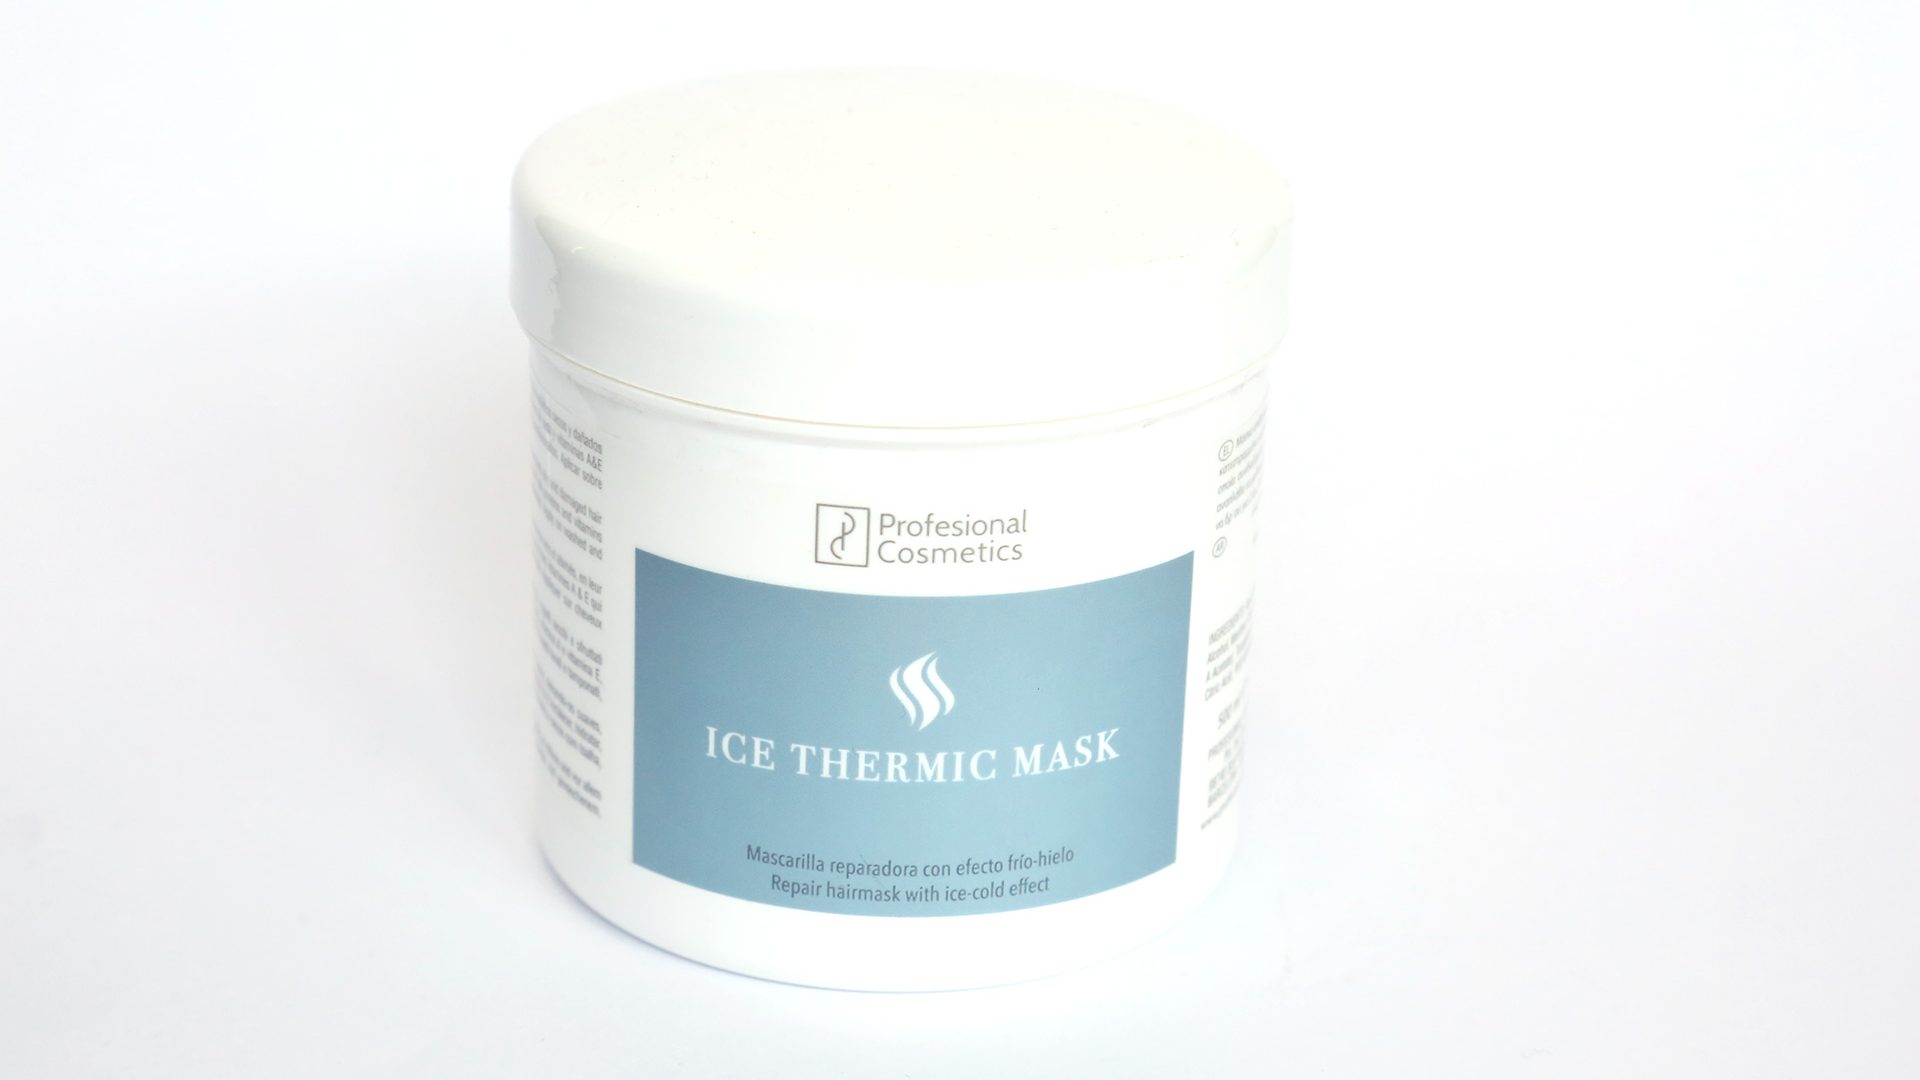 Ice thermic mask